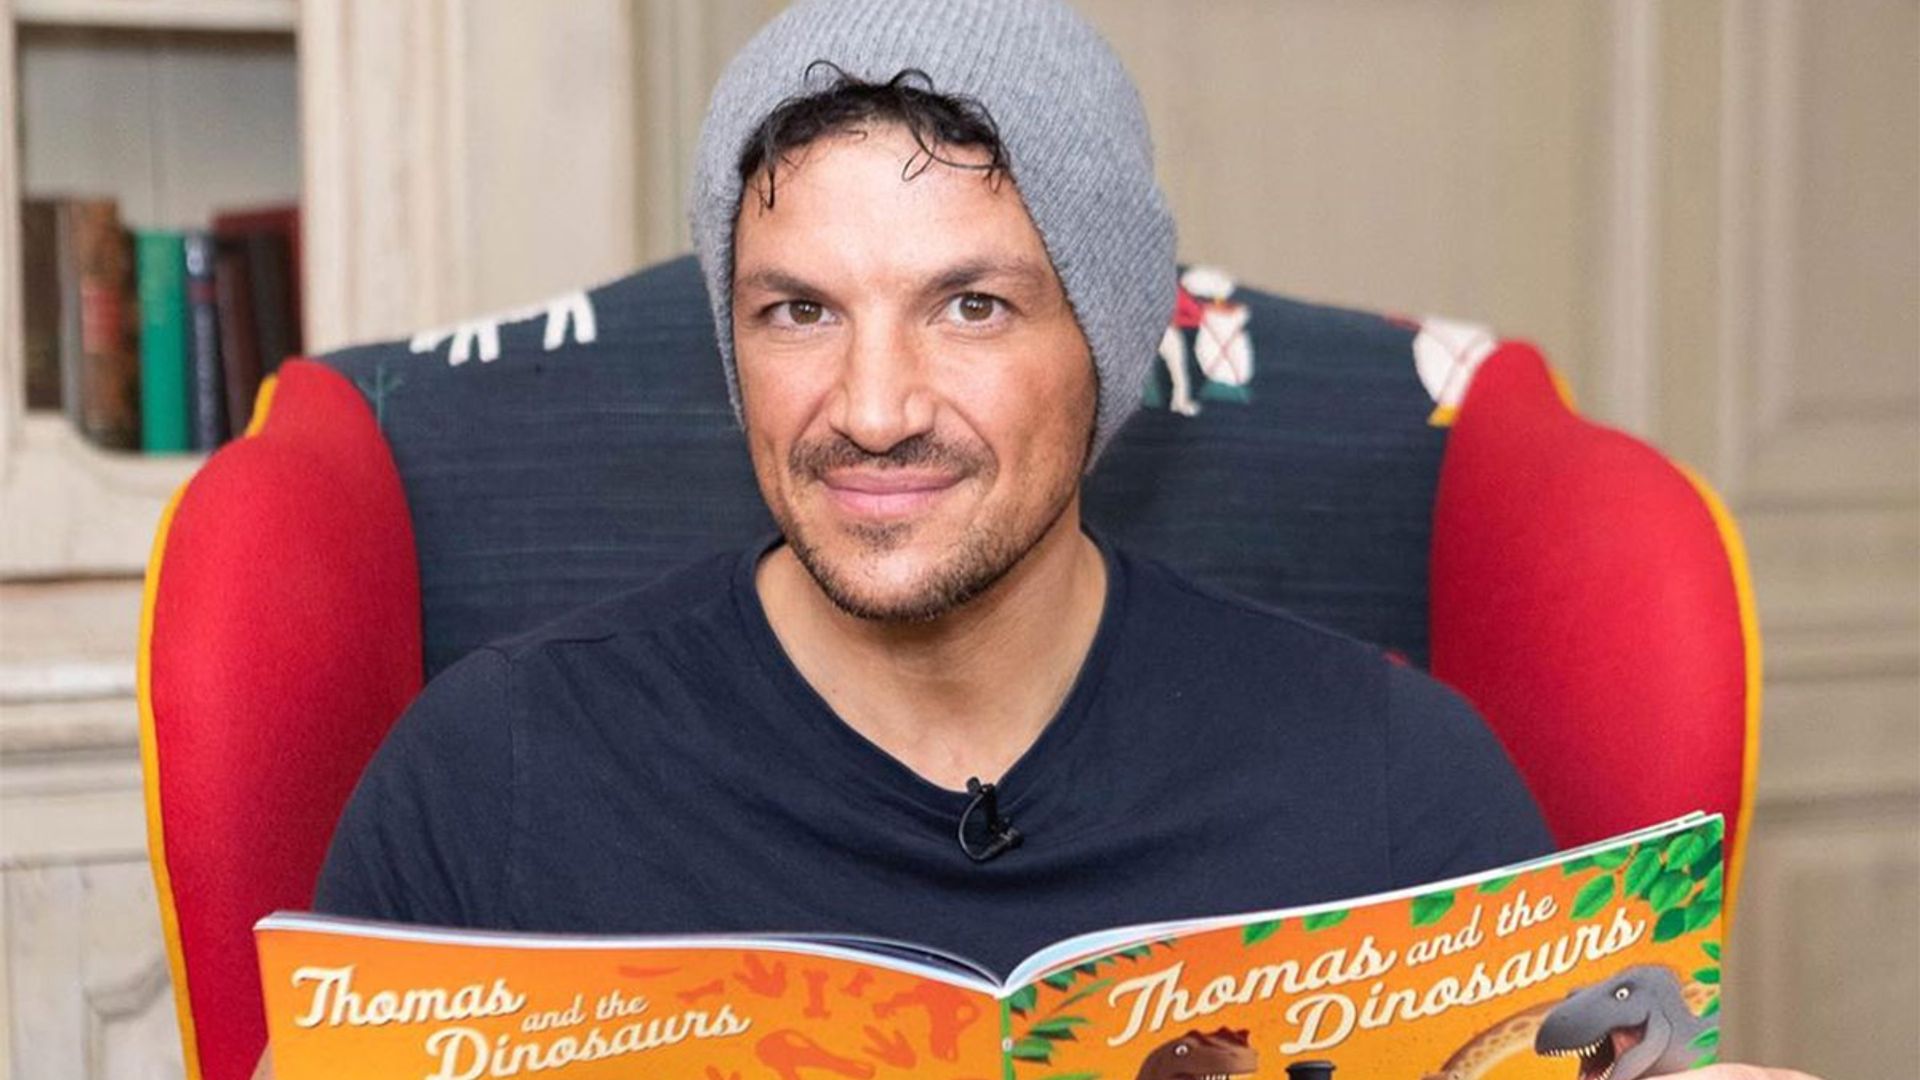 peter andre reading book